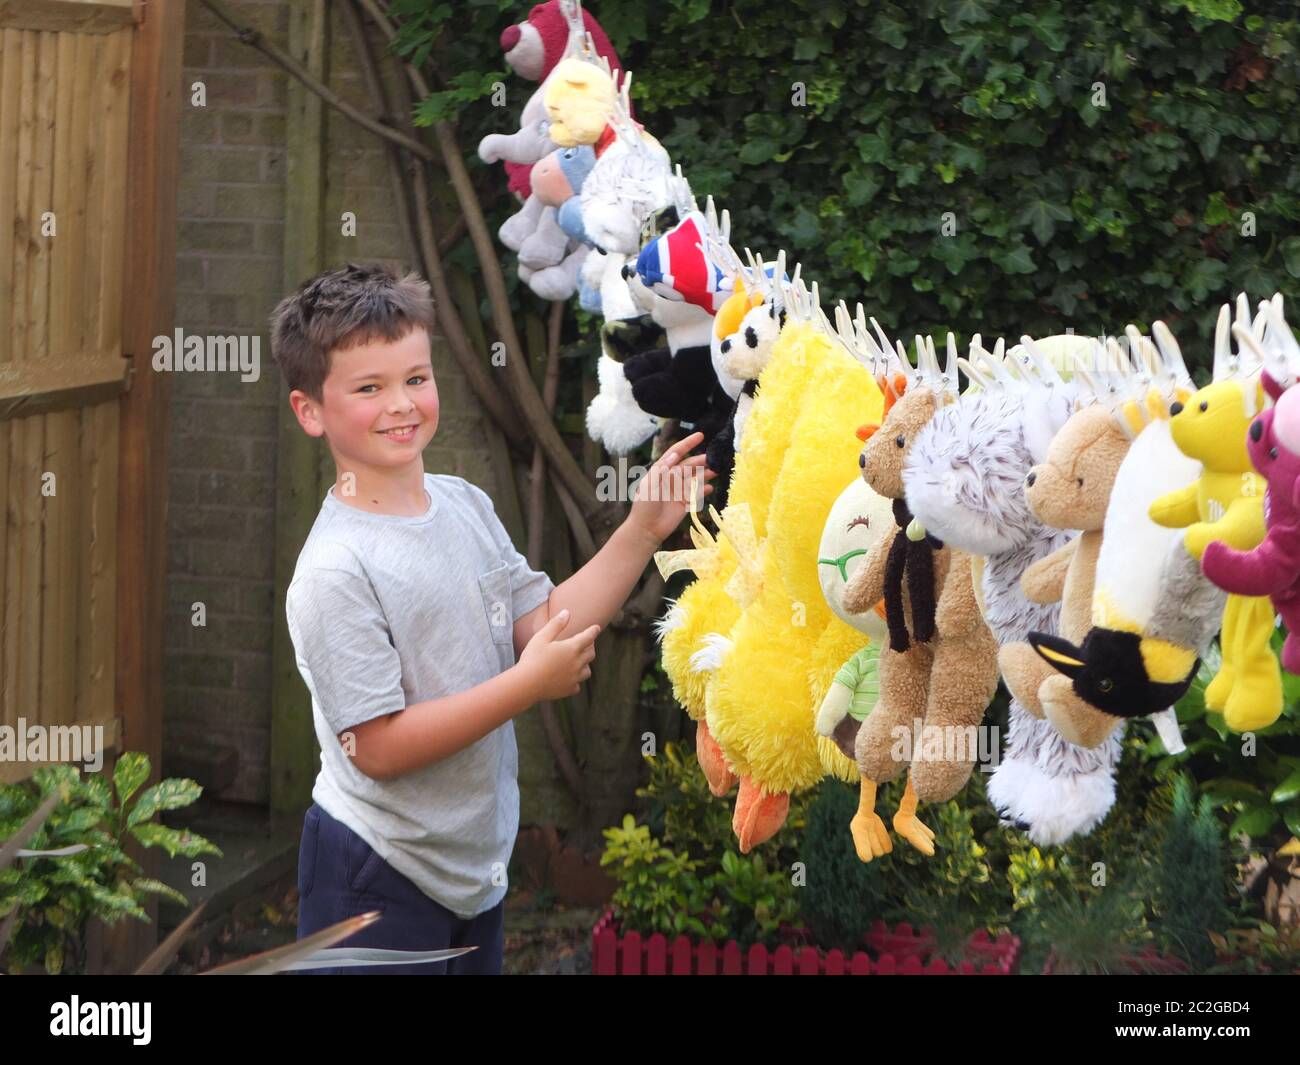 Such a happy joyous child - loads of soft toys washed and drying on the washing line for the school summer fair - very cute Stock Photo